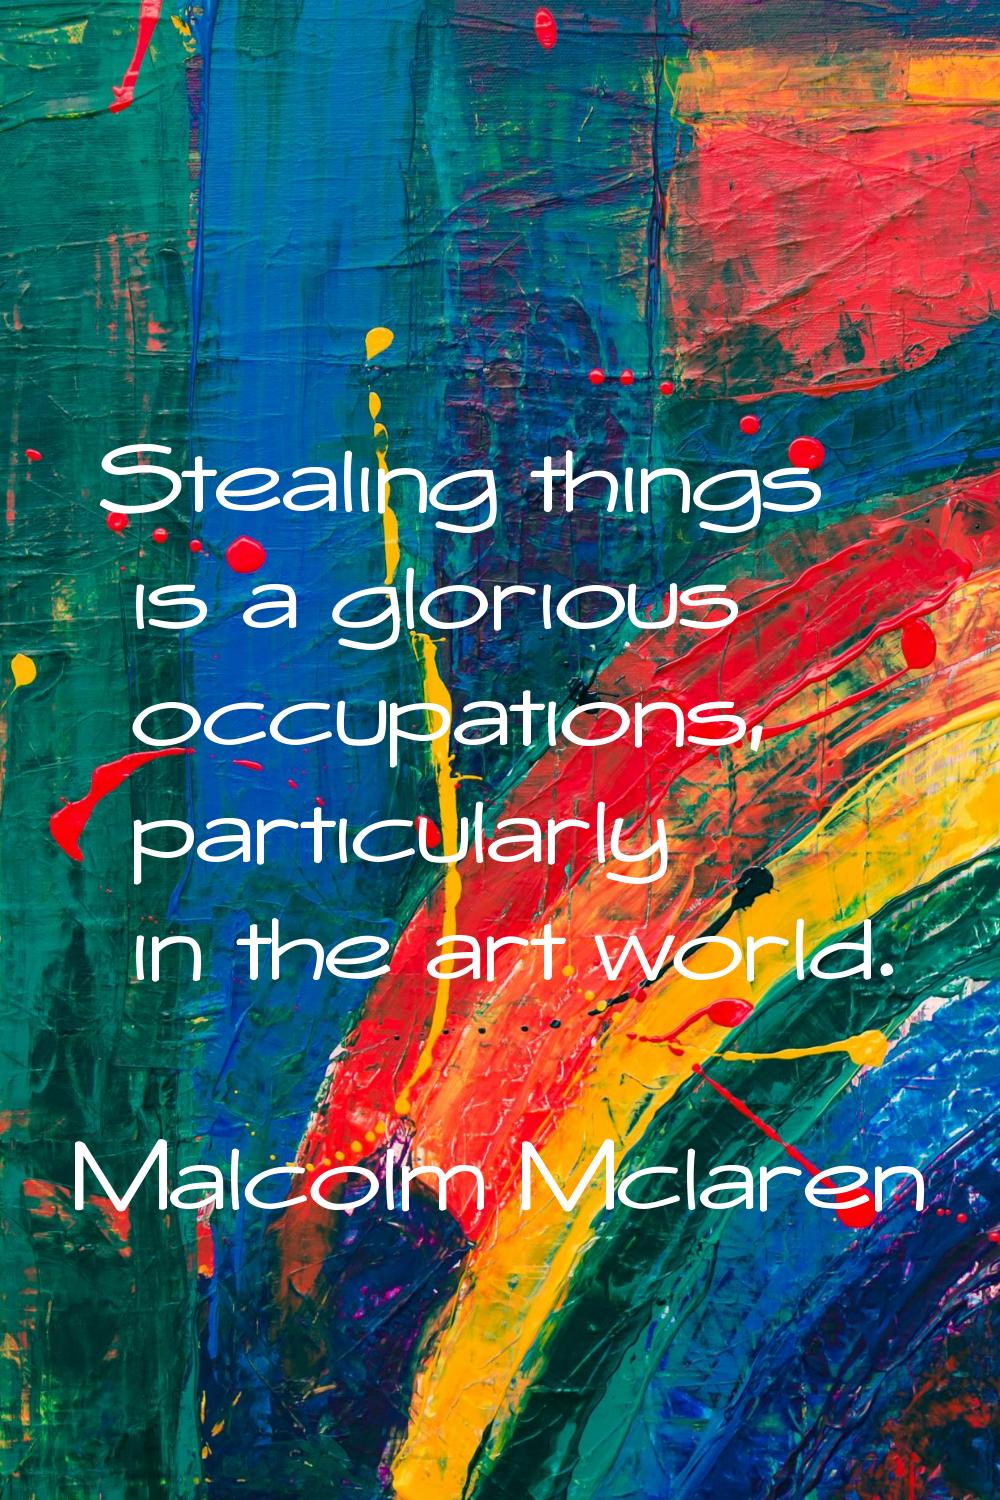 Stealing things is a glorious occupations, particularly in the art world.